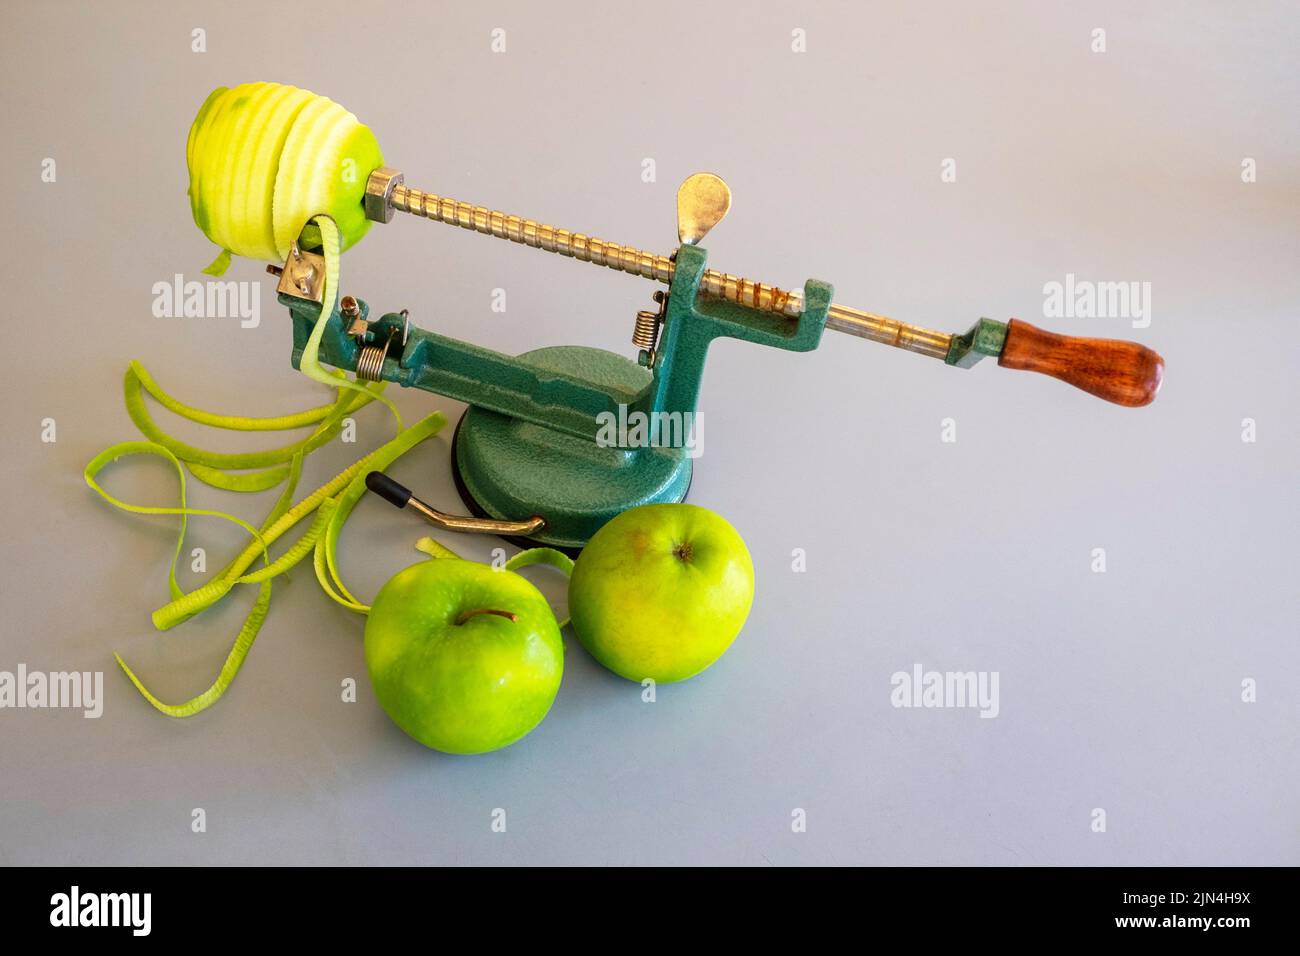 https://c8.alamy.com/comp/2JN4H9X/apple-coring-and-peeling-device-with-cooking-apples-2JN4H9X.jpg